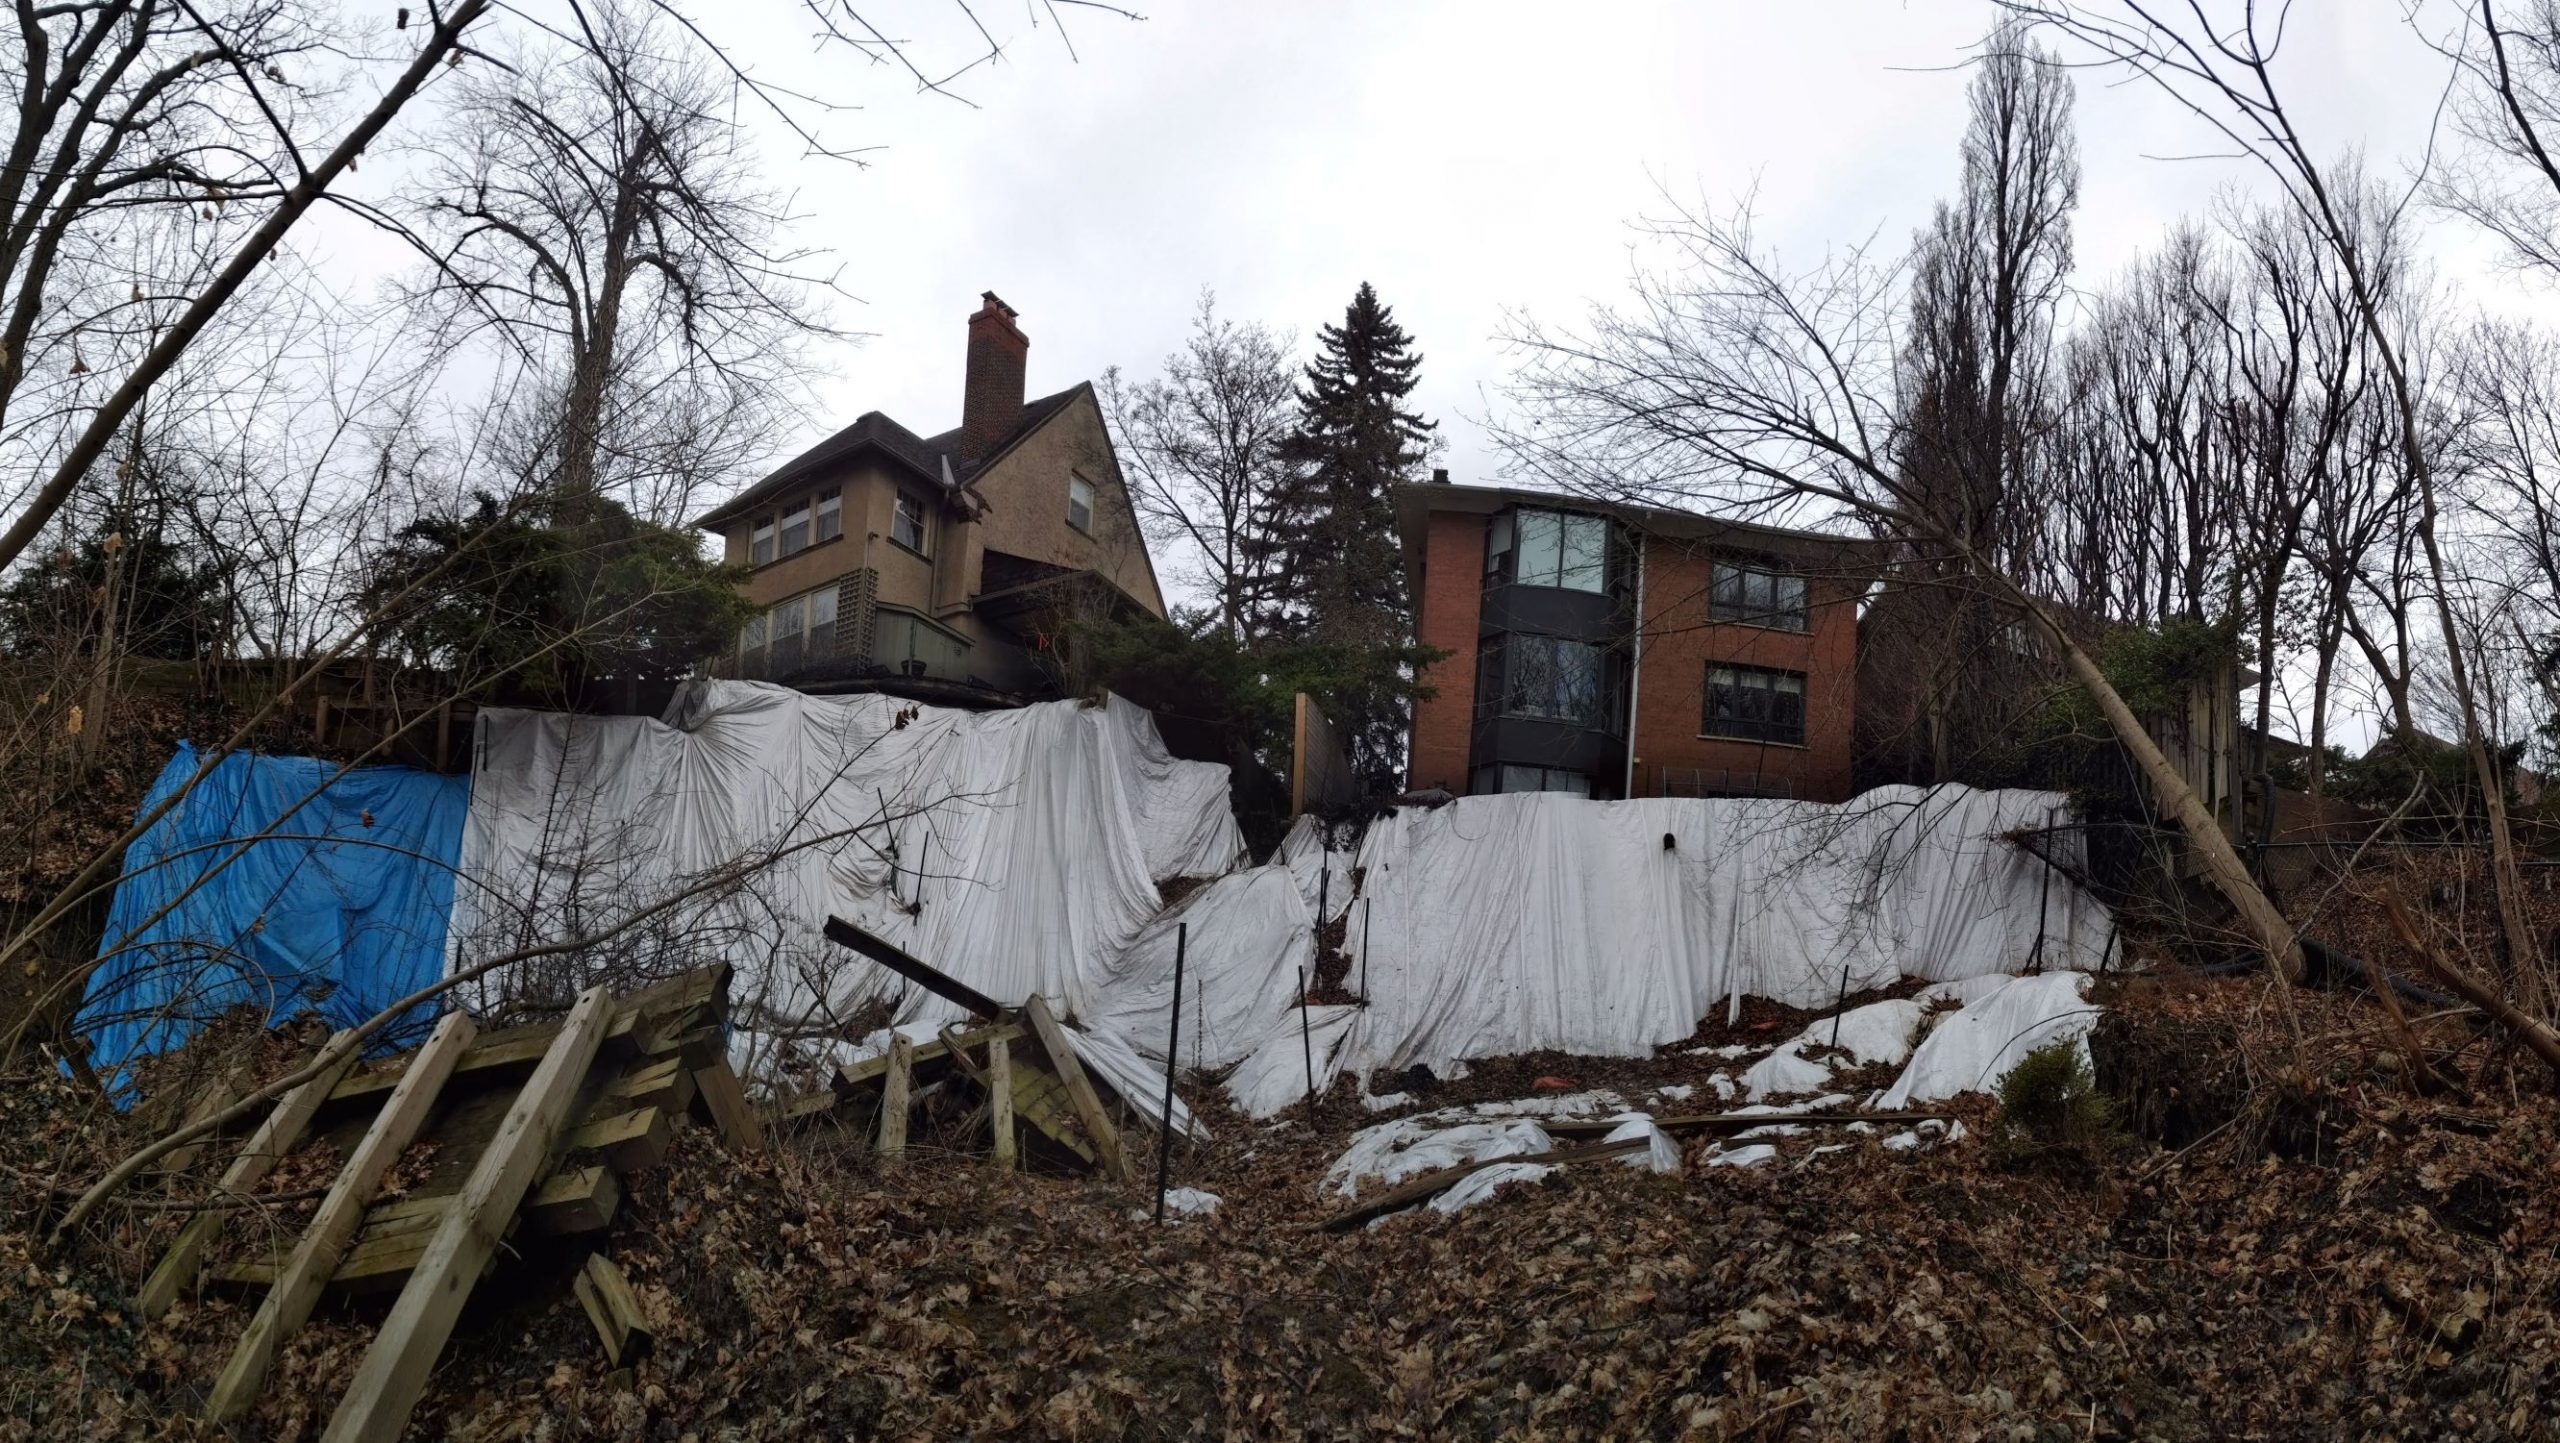 Tarps were installed by TRCA staff to prevent or reduce erosion along the slope face as an interim measure while a permanent solution was being developed.